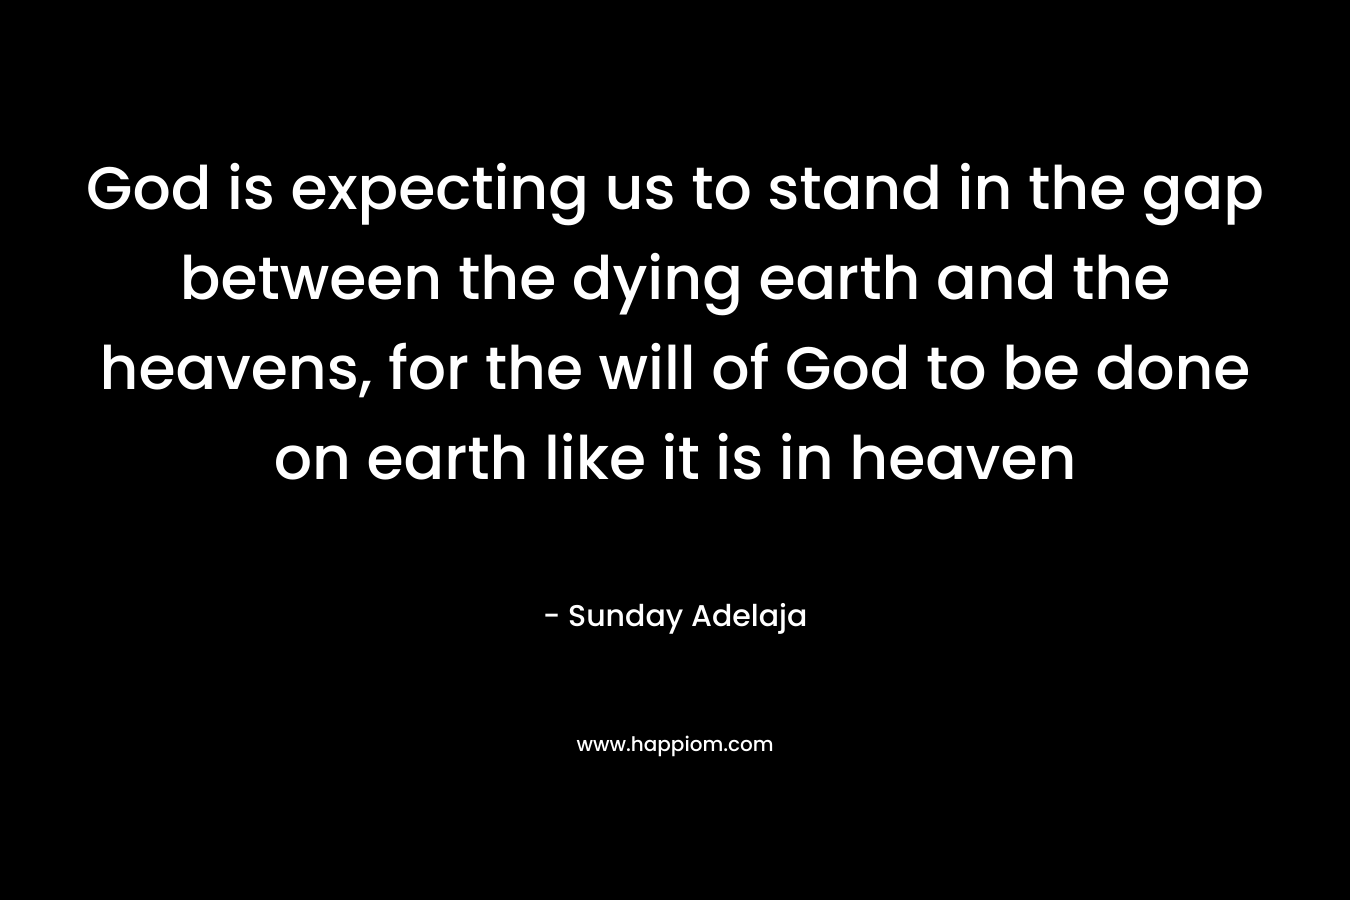 God is expecting us to stand in the gap between the dying earth and the heavens, for the will of God to be done on earth like it is in heaven – Sunday Adelaja